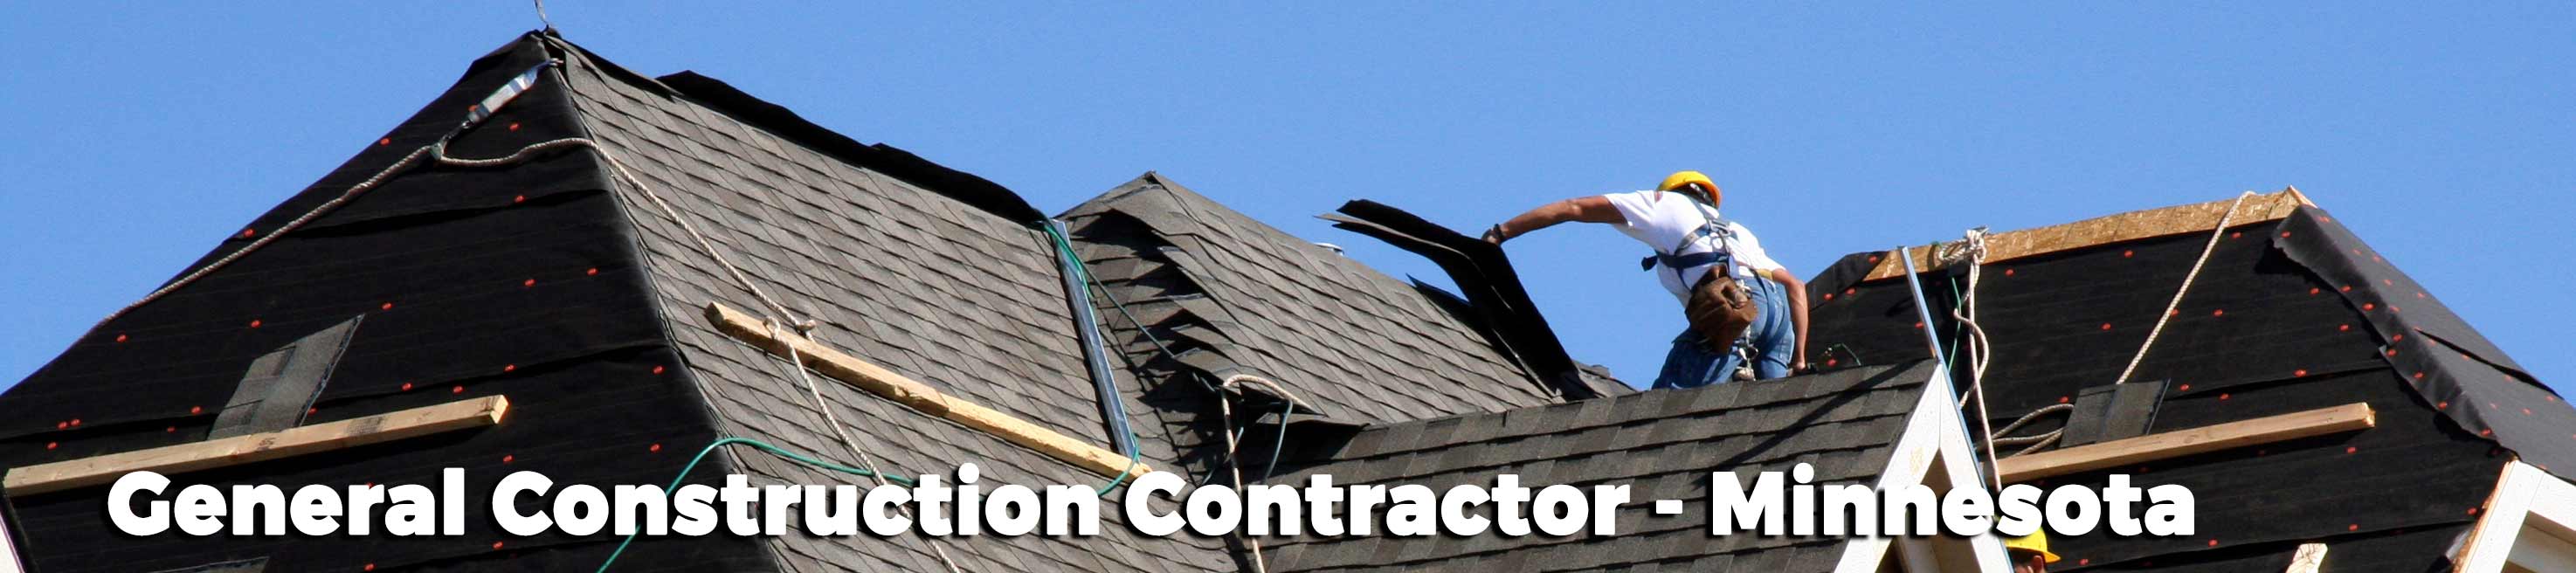 welter-construction-contractor-mn